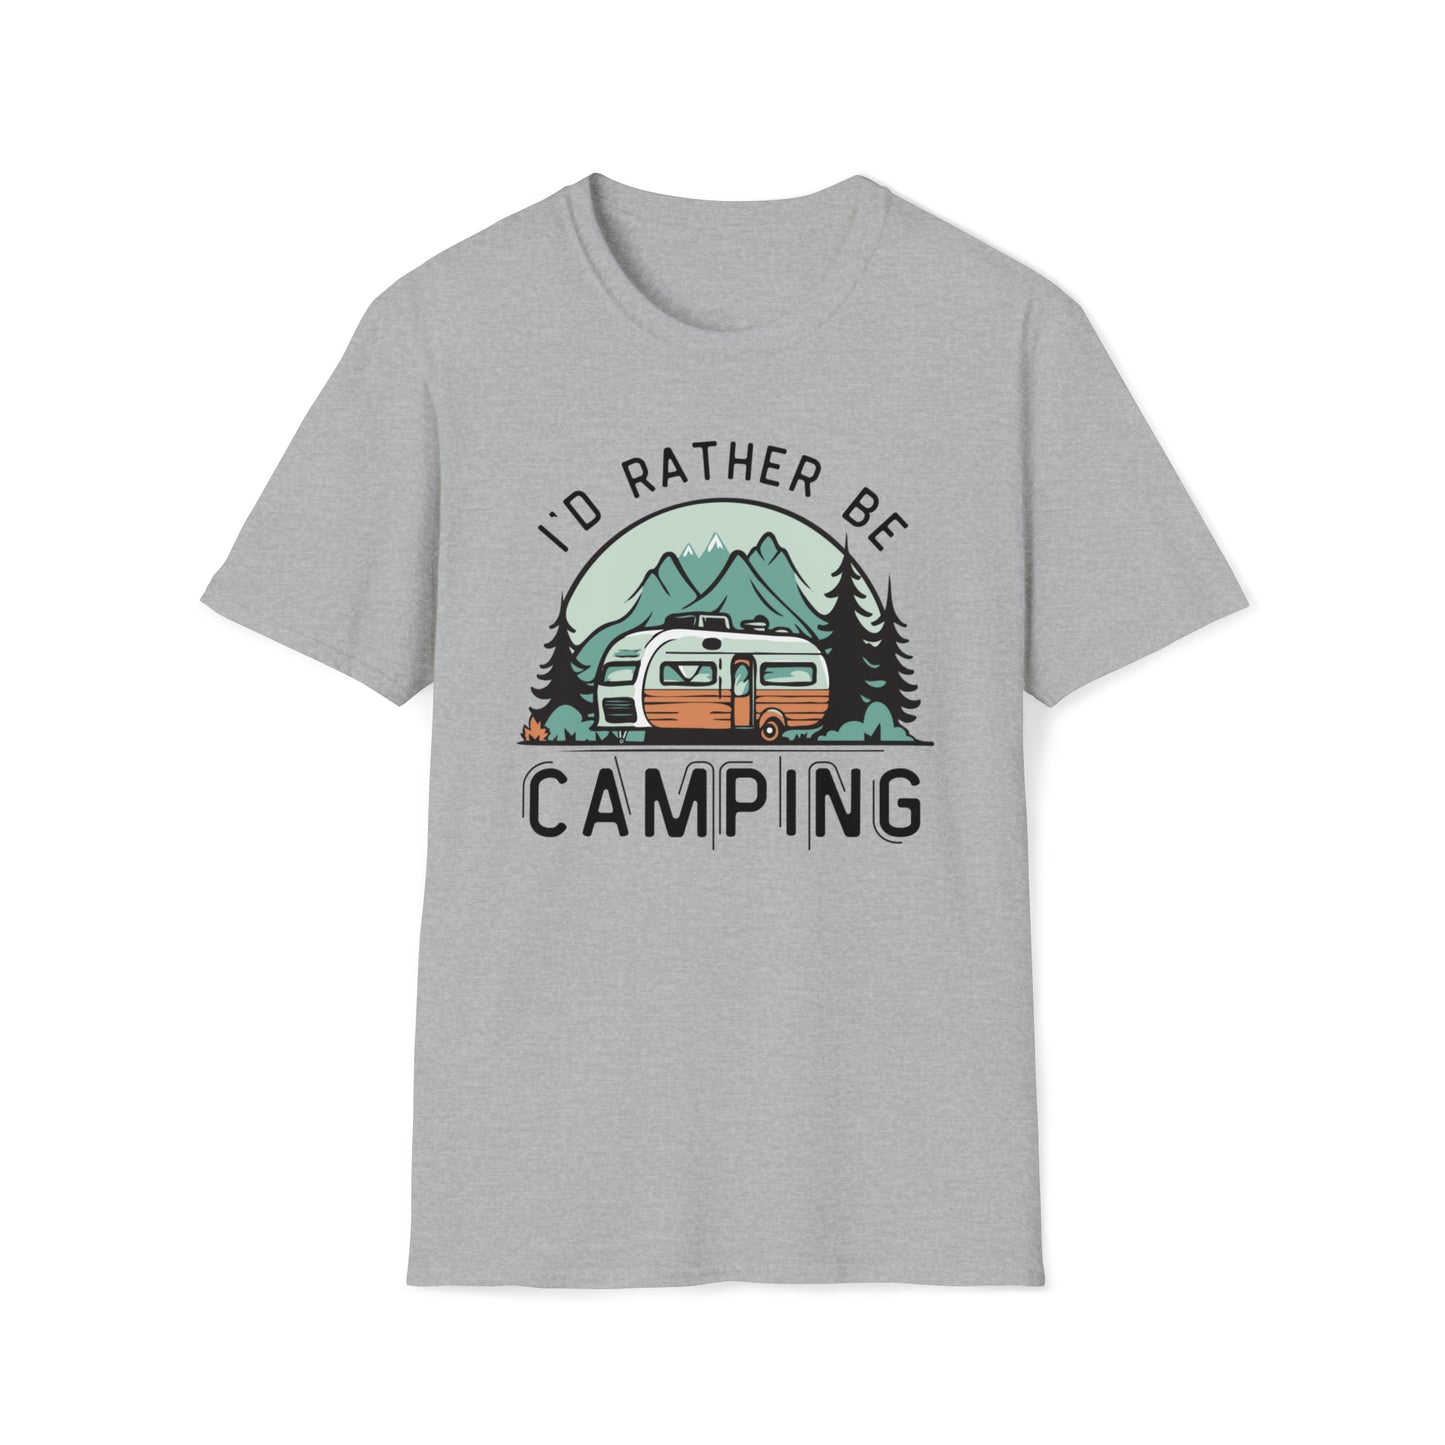 Unisex Softstyle T-Shirt, I'd Rather Be Camping